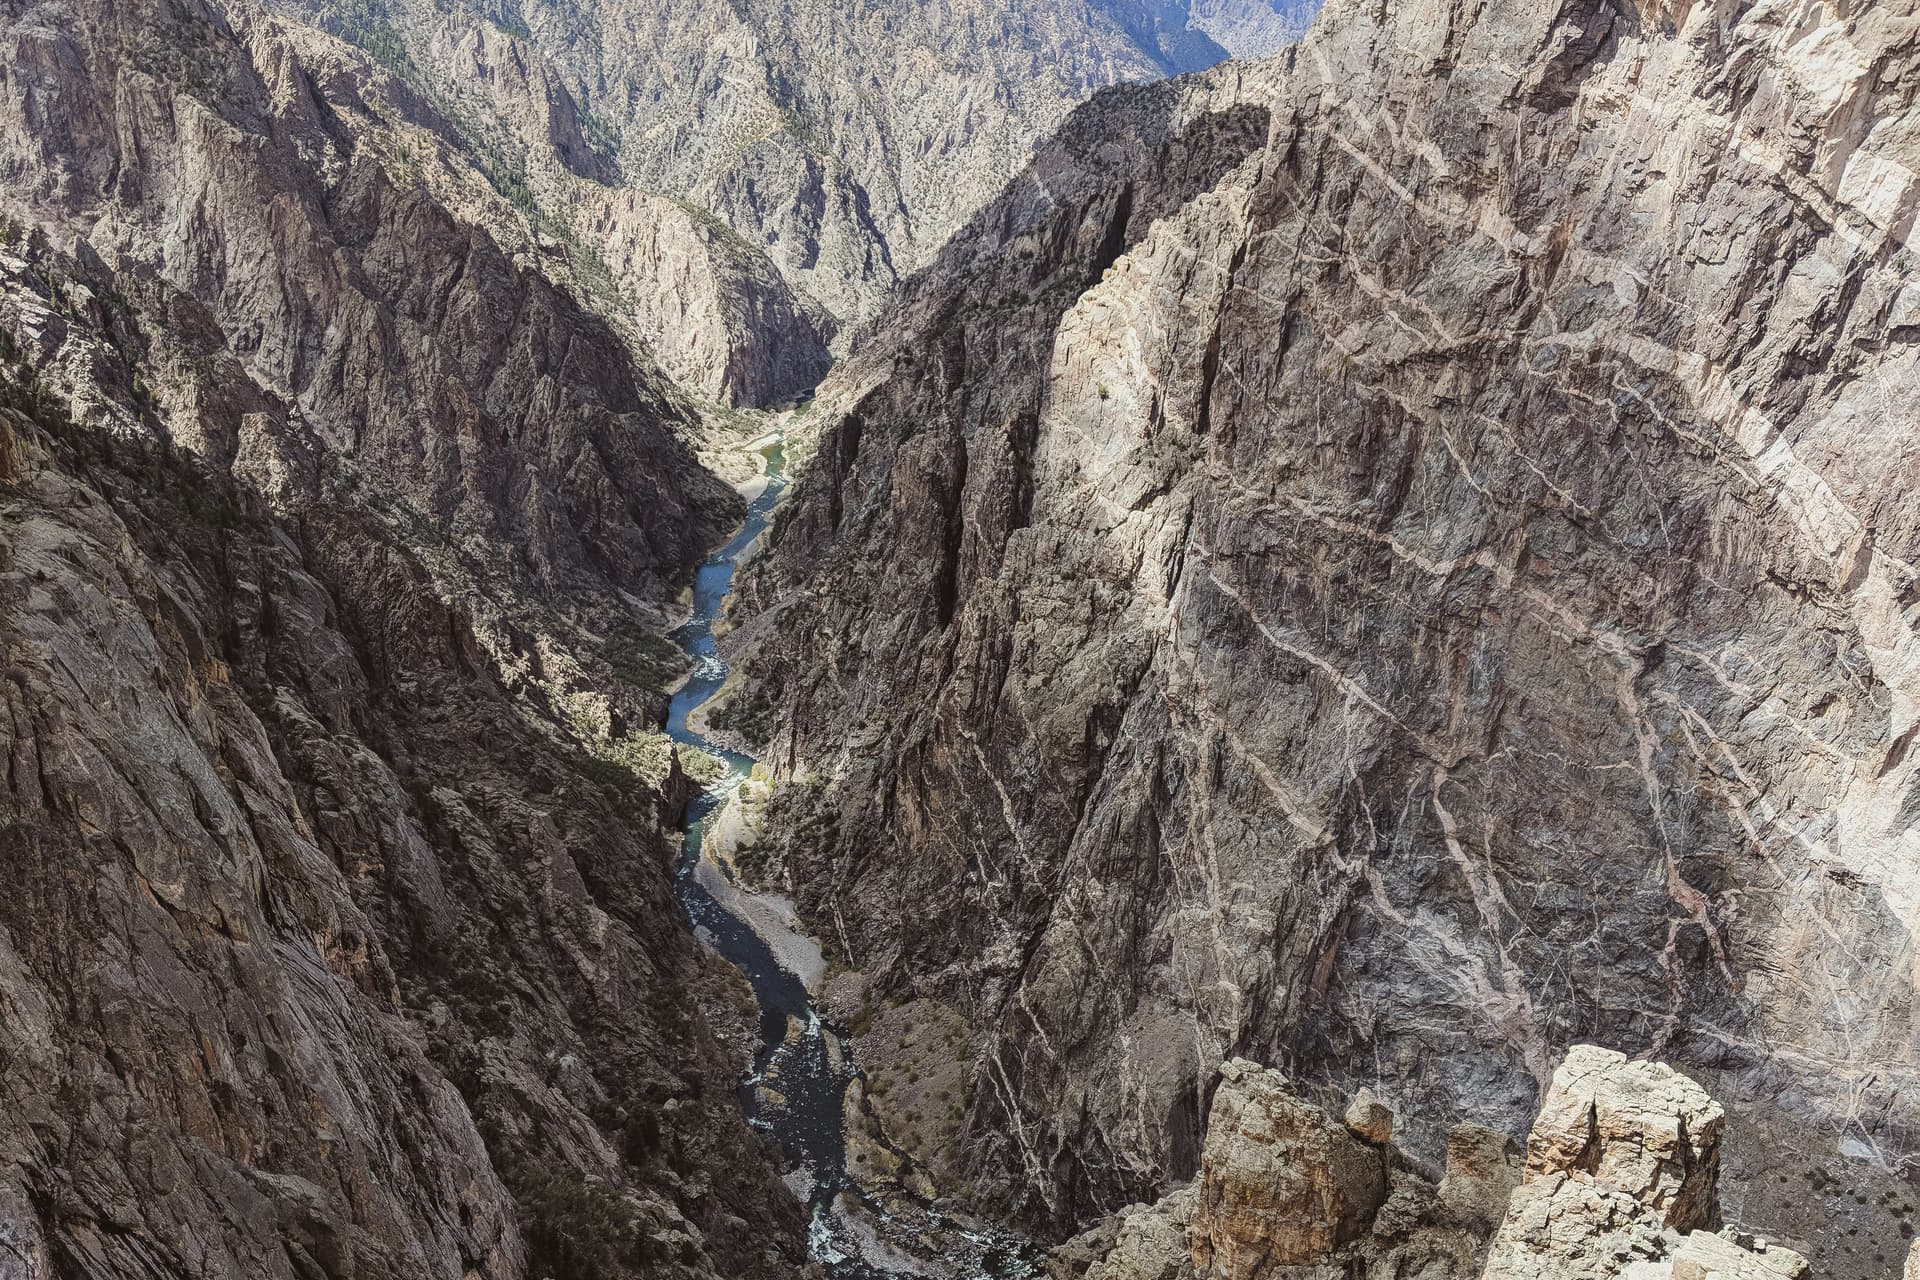 A view down the Gunnison, through the steep, broken walls of the Black Canyon. On the right, one of the dark purple canyon walls is shot through with intrusions of white granite.